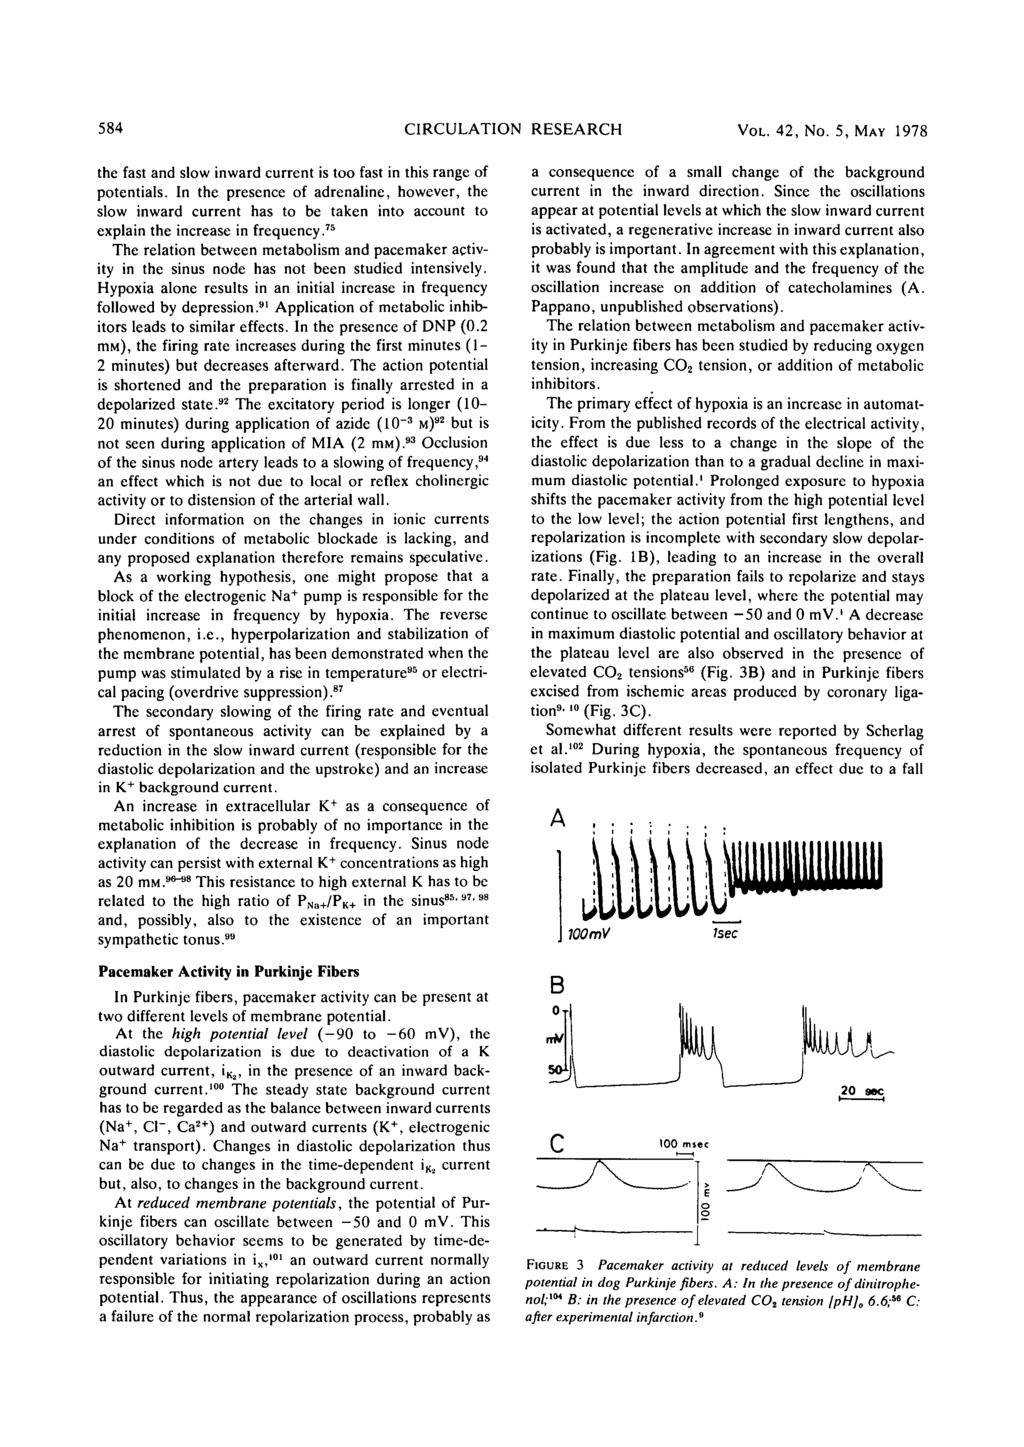 584 CIRCULATION RESEARCH VOL. 42, No. 5, MAY 1978 the fast and slow inward current is too fast in this range of potentials.